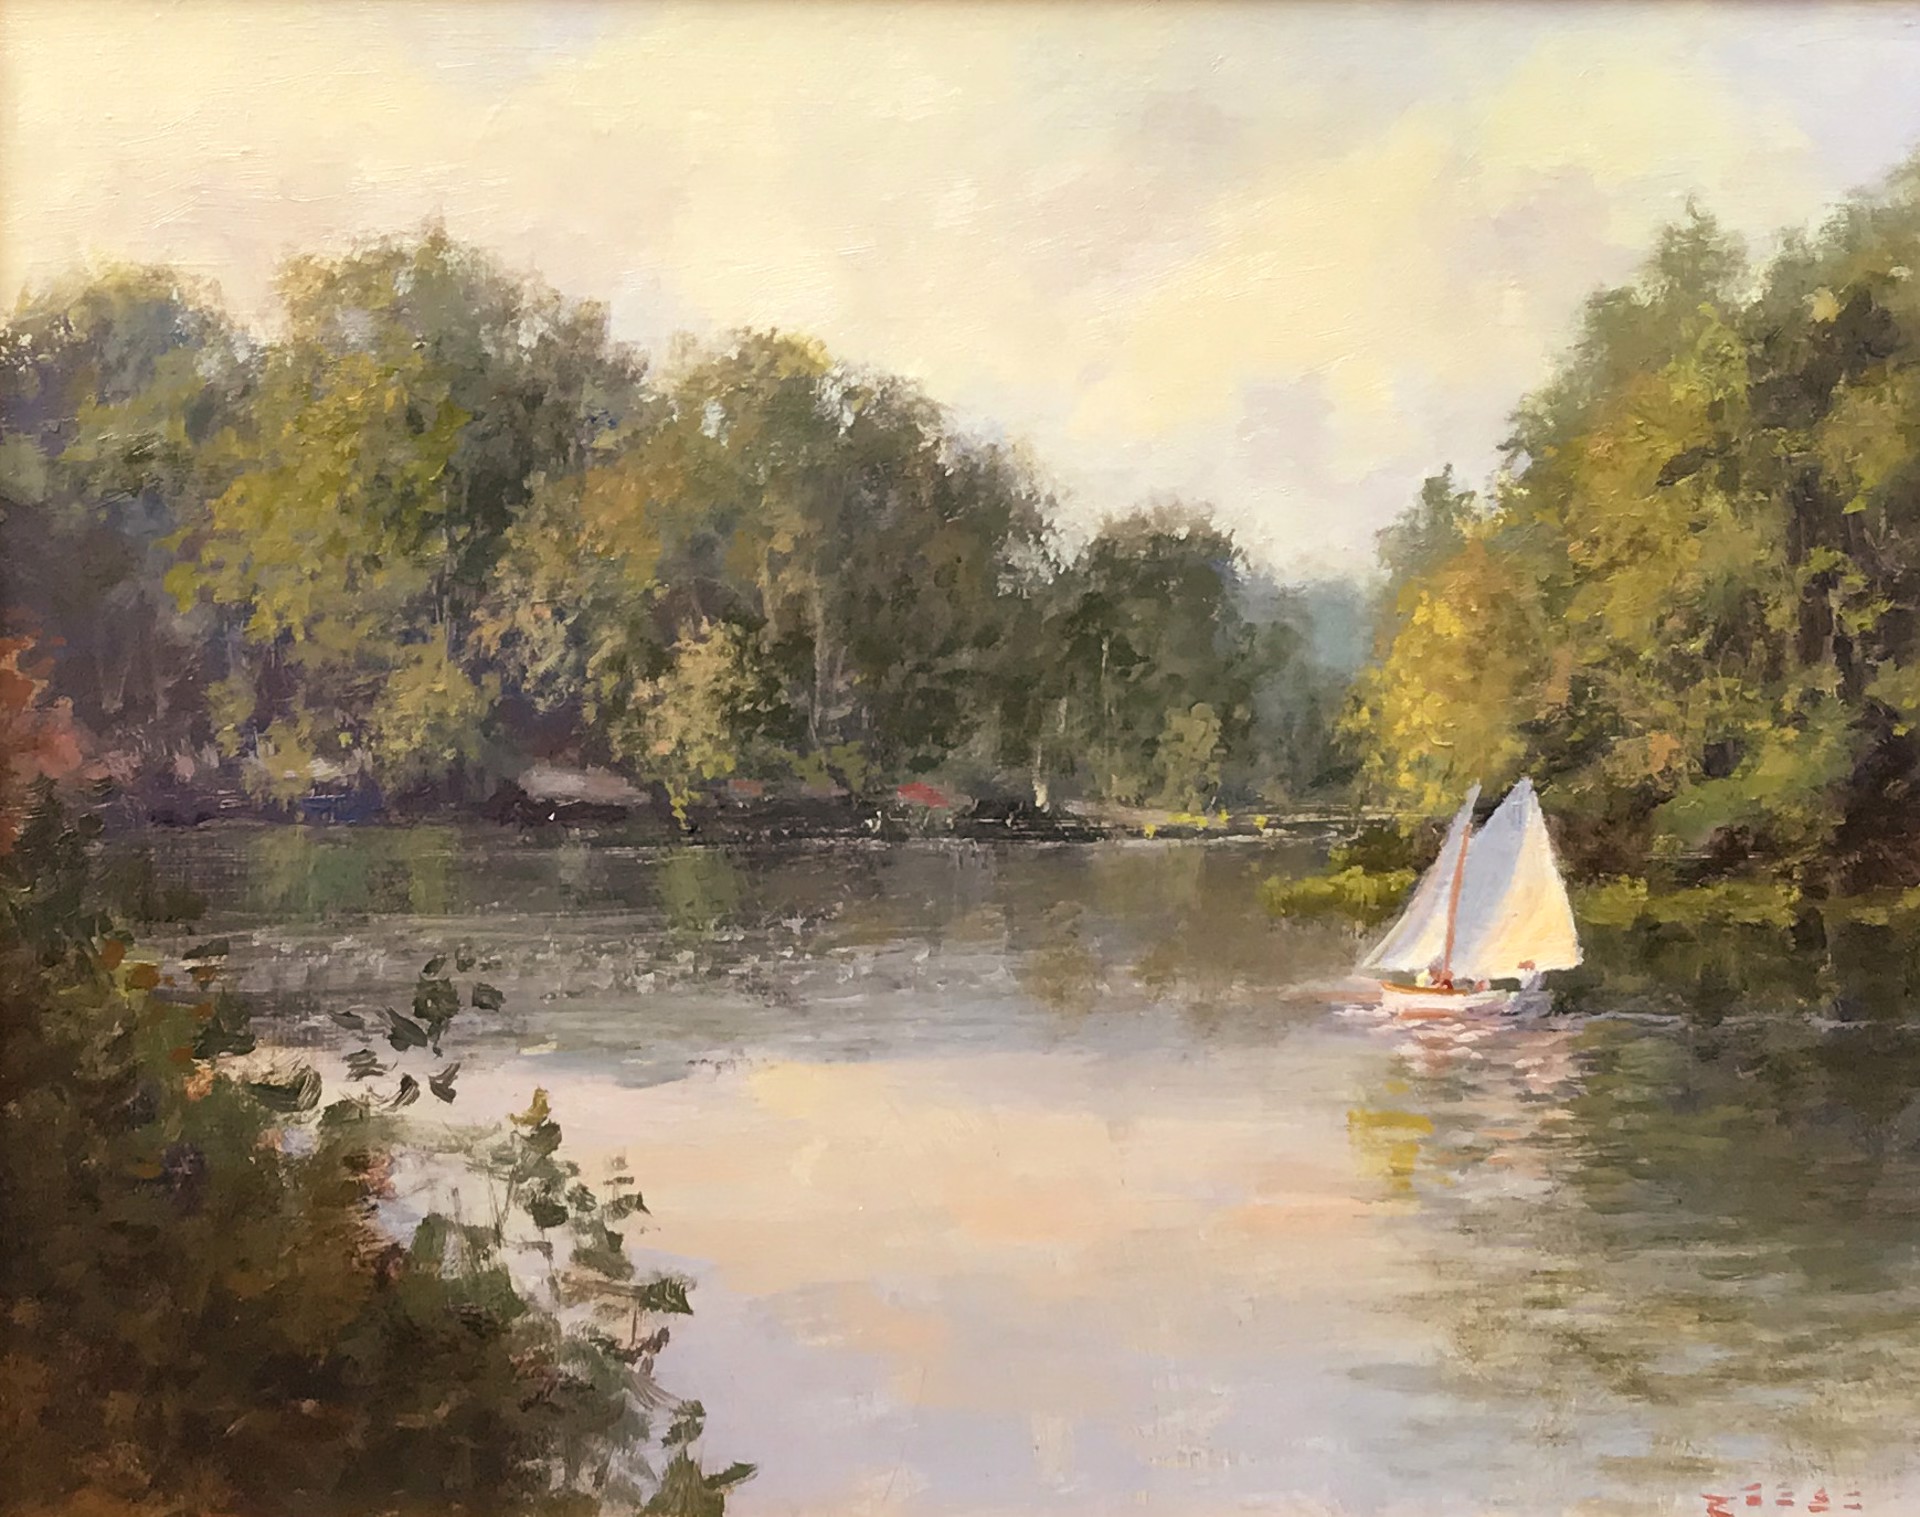 Connecticut River Scene by Paul Beebe